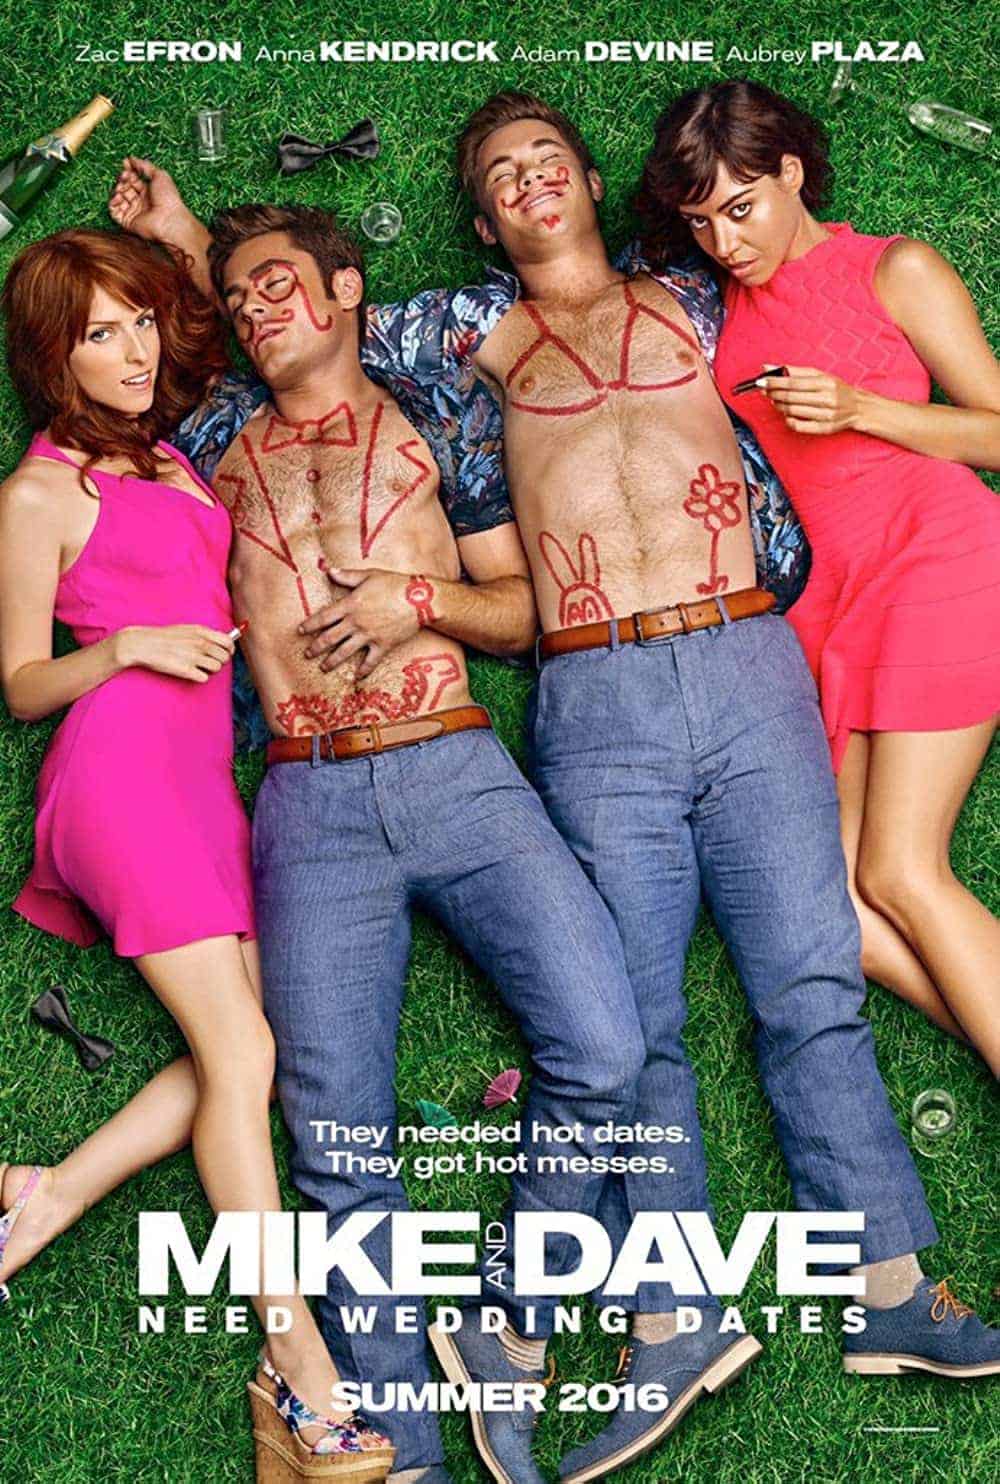 Mike and Dave Need Wedding Dates (2016) Best Lesbian Sex Movies to Check Out